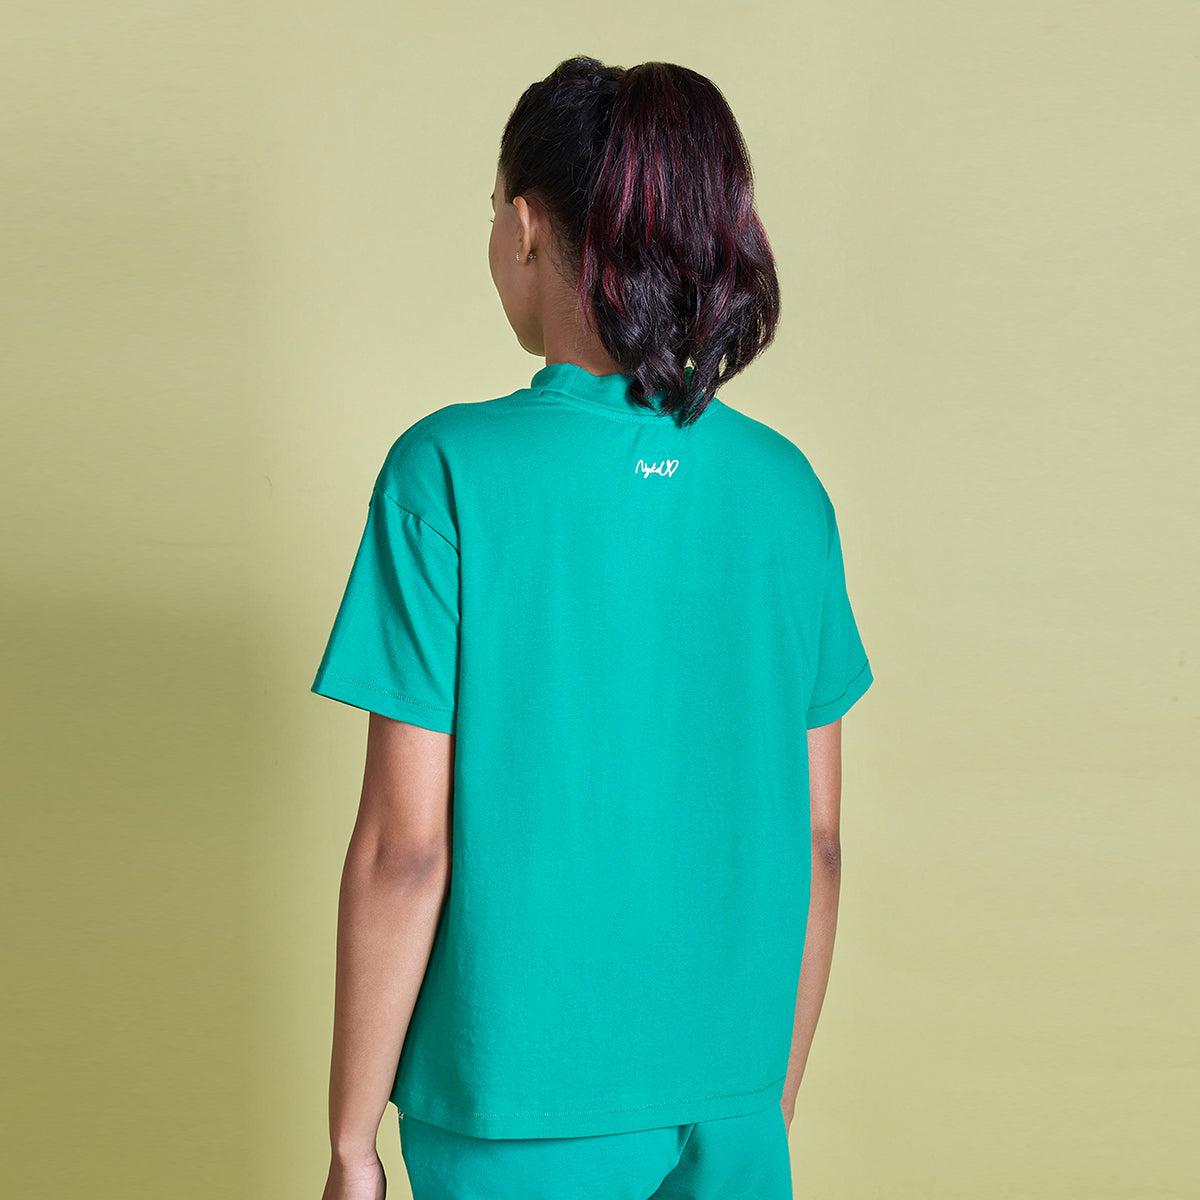 Nykd All Day Iconic Cotton Boxy Tee - NYLE276 - Pepper green